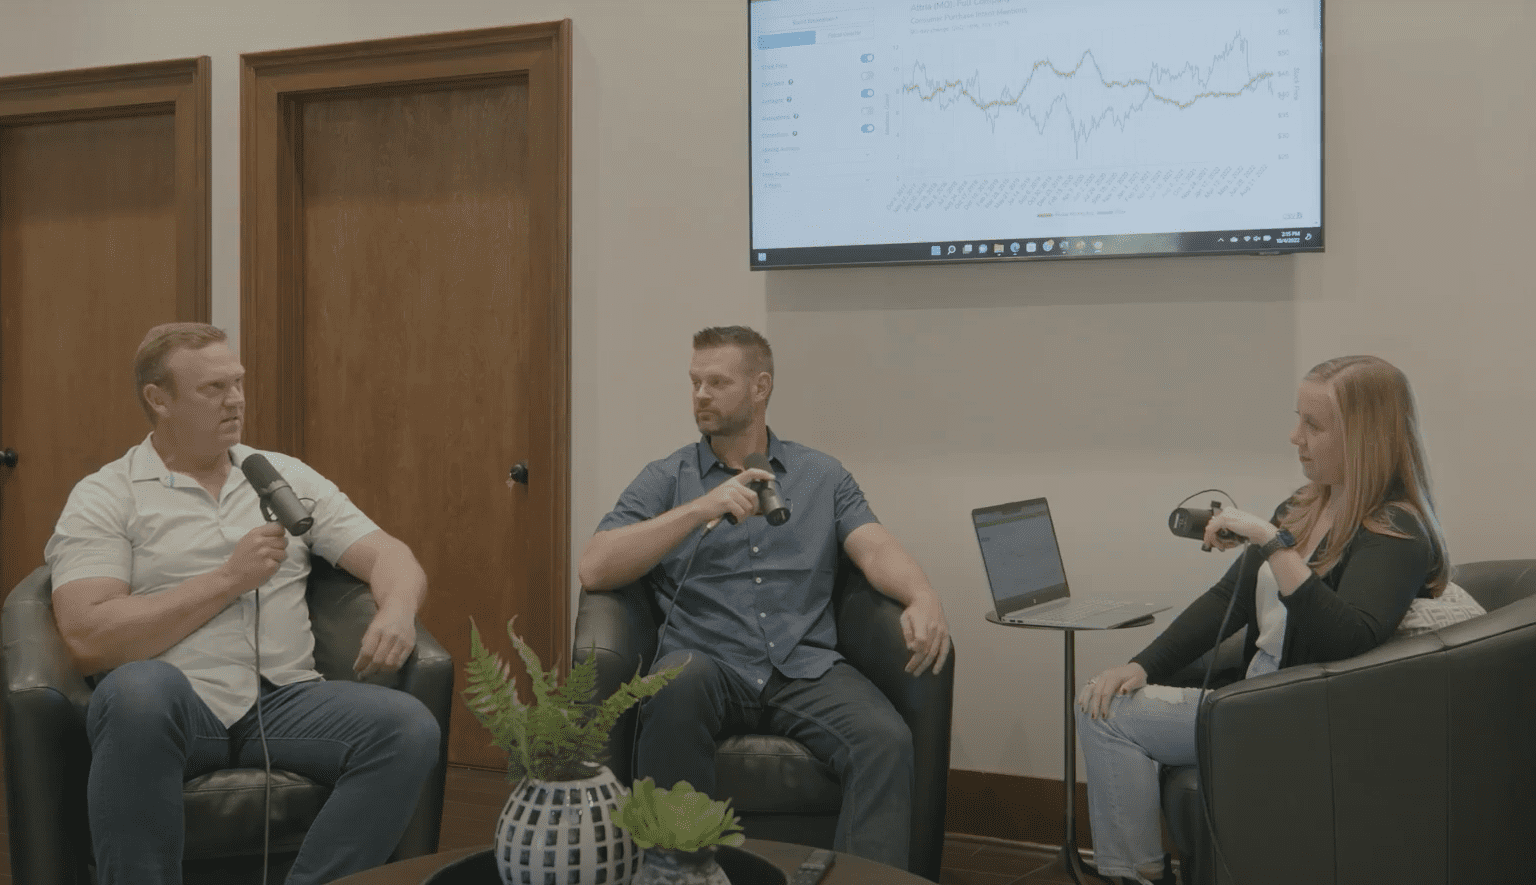 How Podcasting Has Helped Grow the Message of Local Stock Market Experts